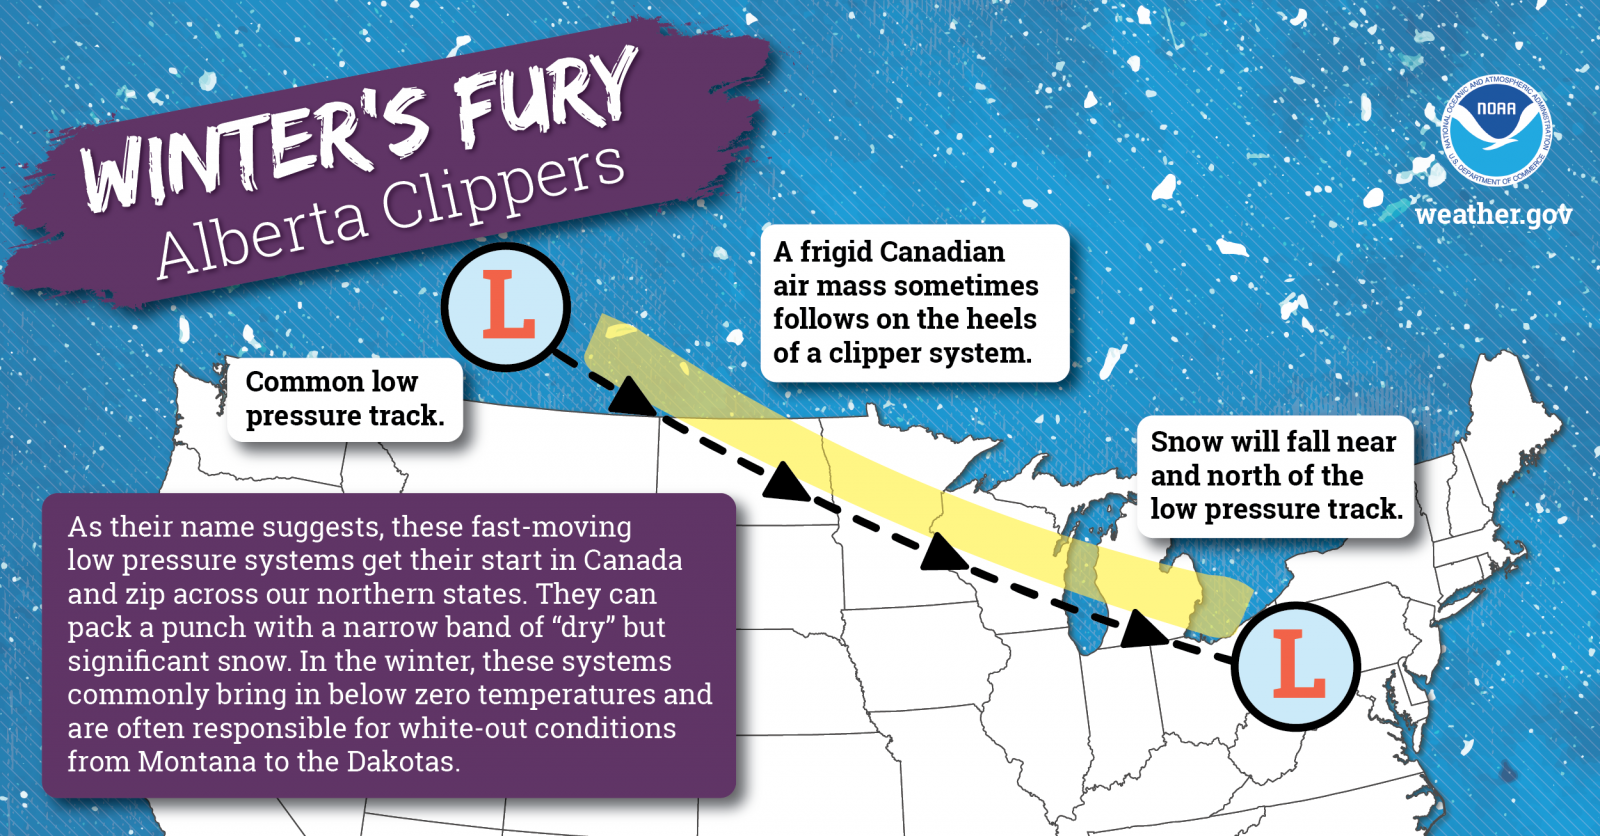 Winter's Fury - Alberta Clipper: As their name suggest, these fast-moving low pressure systems get their start in Canada and zip across our northern states. They can pack a punch with a narrow band of 'dry' but significant snow. In the winter, these systems commonly bring in below zerp temperatures and are often responsible for white-out conditions from Montana to the Dakotas.